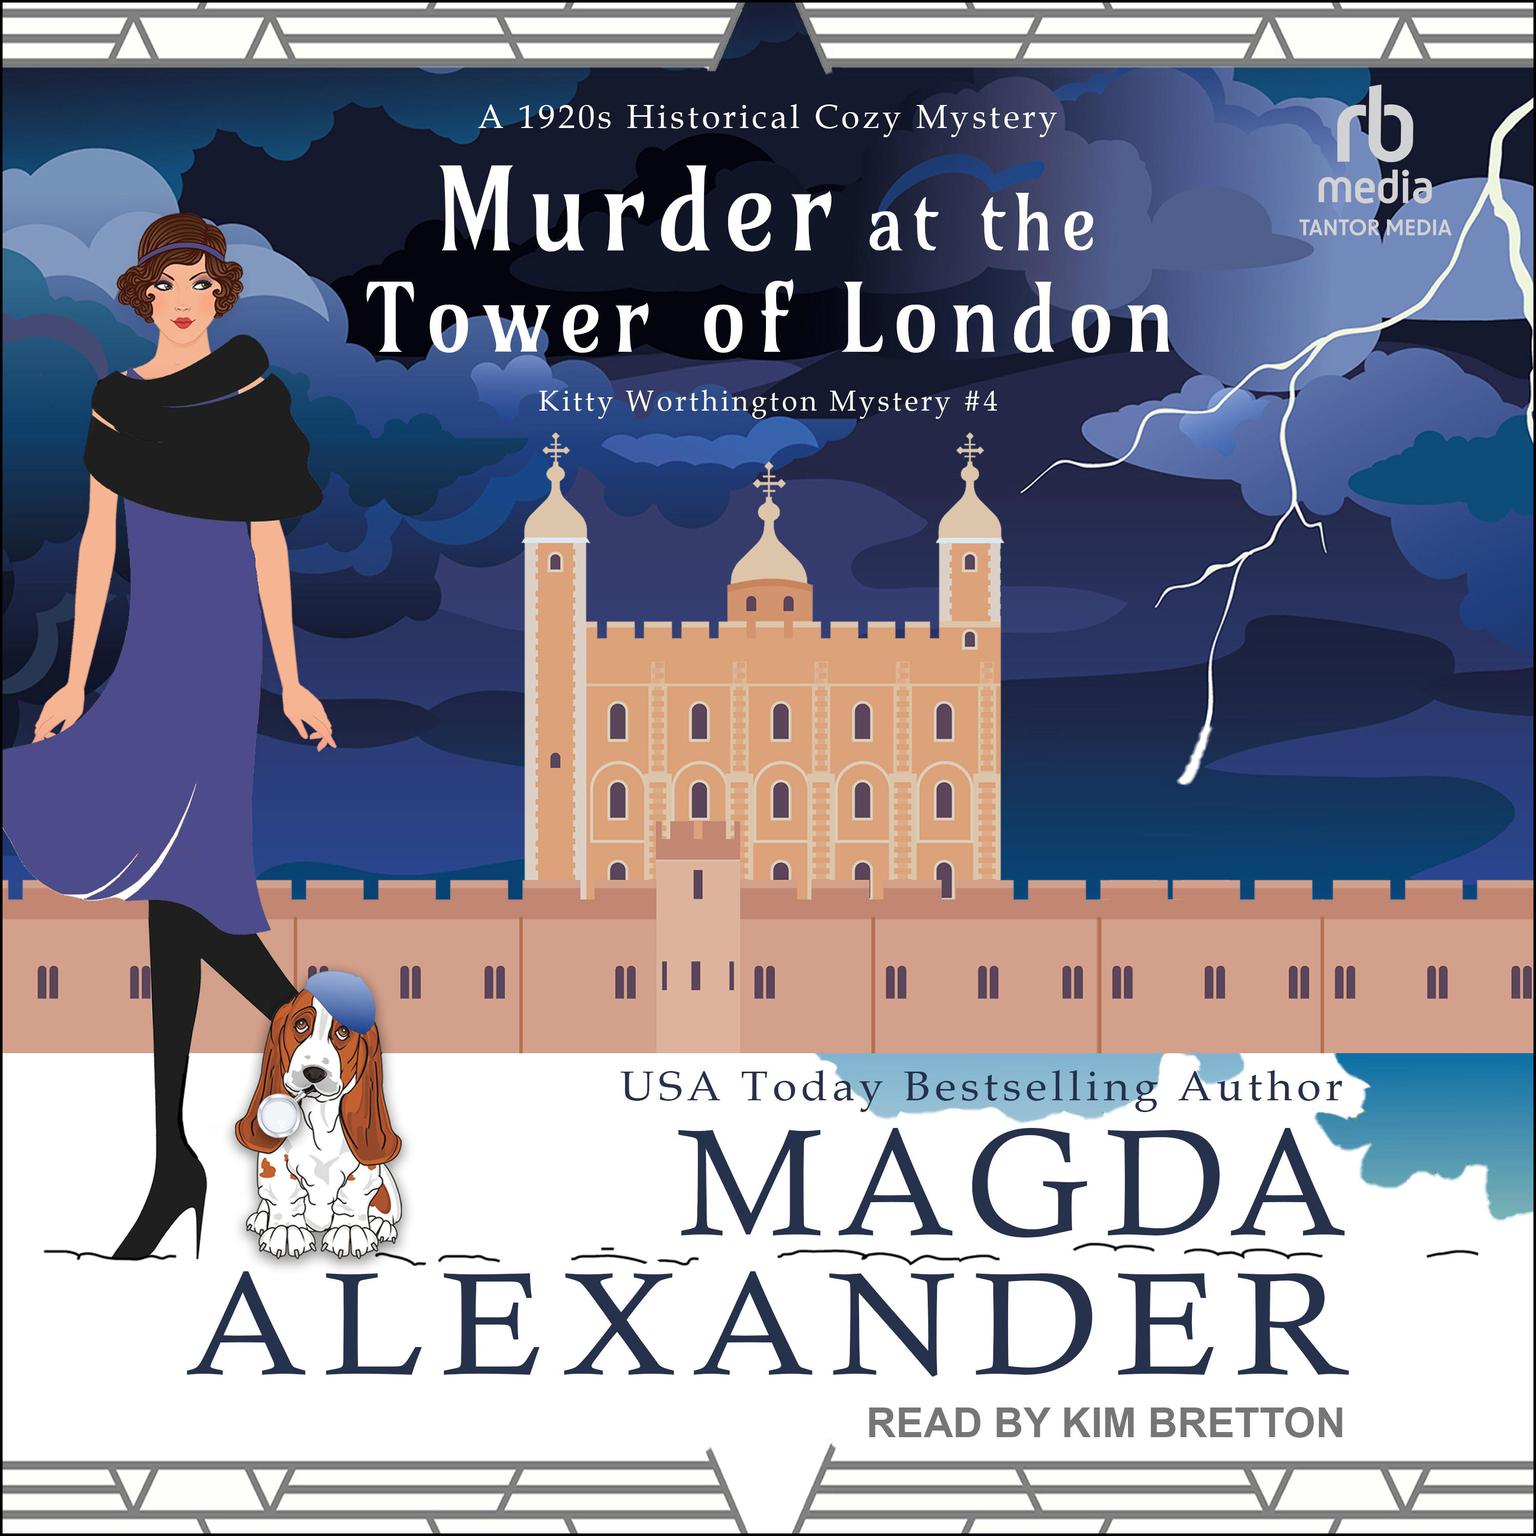 Murder at the Tower of London: A 1920s Historical Cozy Mystery Audiobook, by Magda Alexander